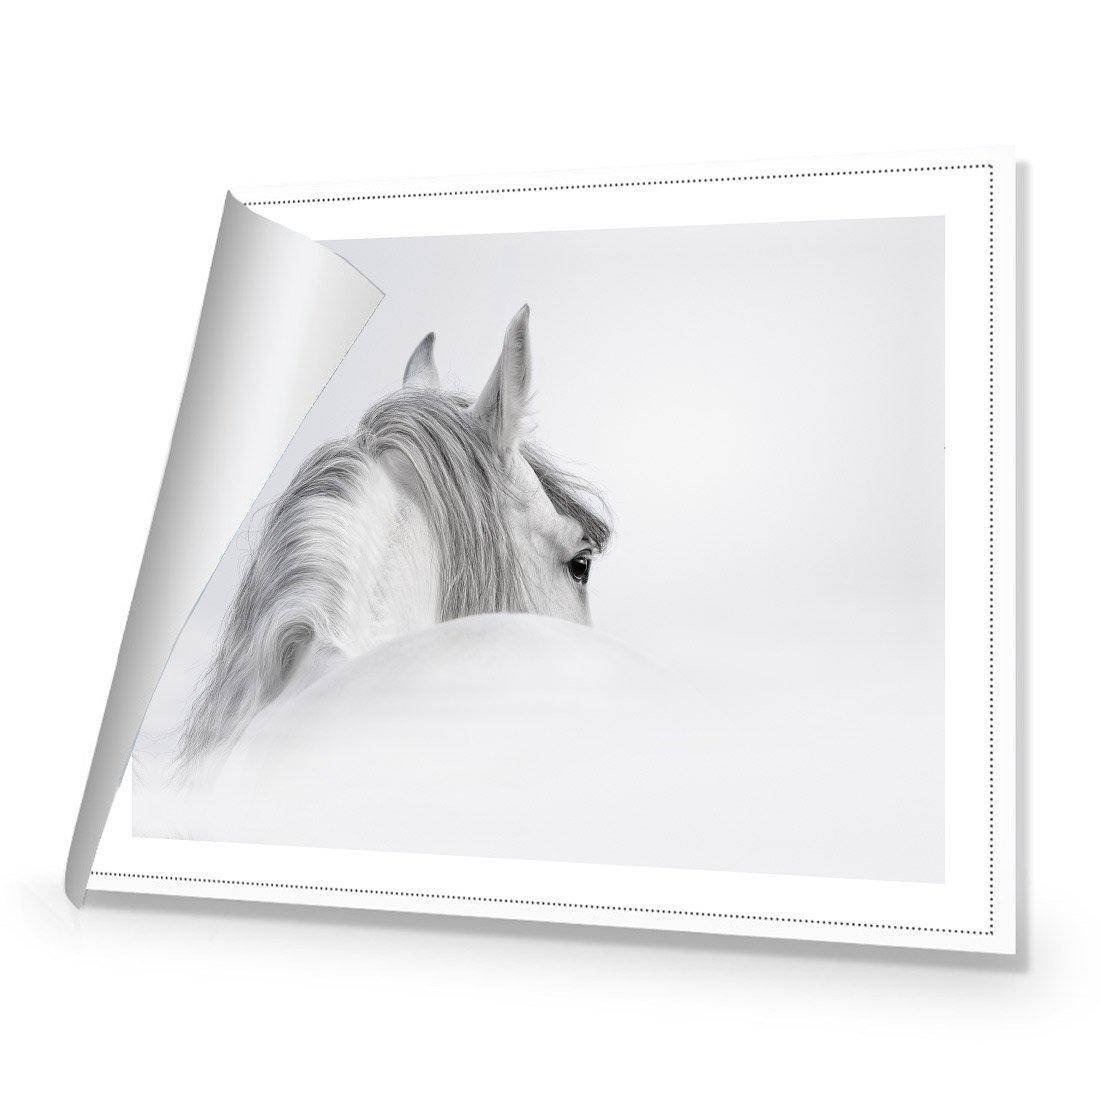 Andalusian Horse In The Mist Rolled Canvas Print